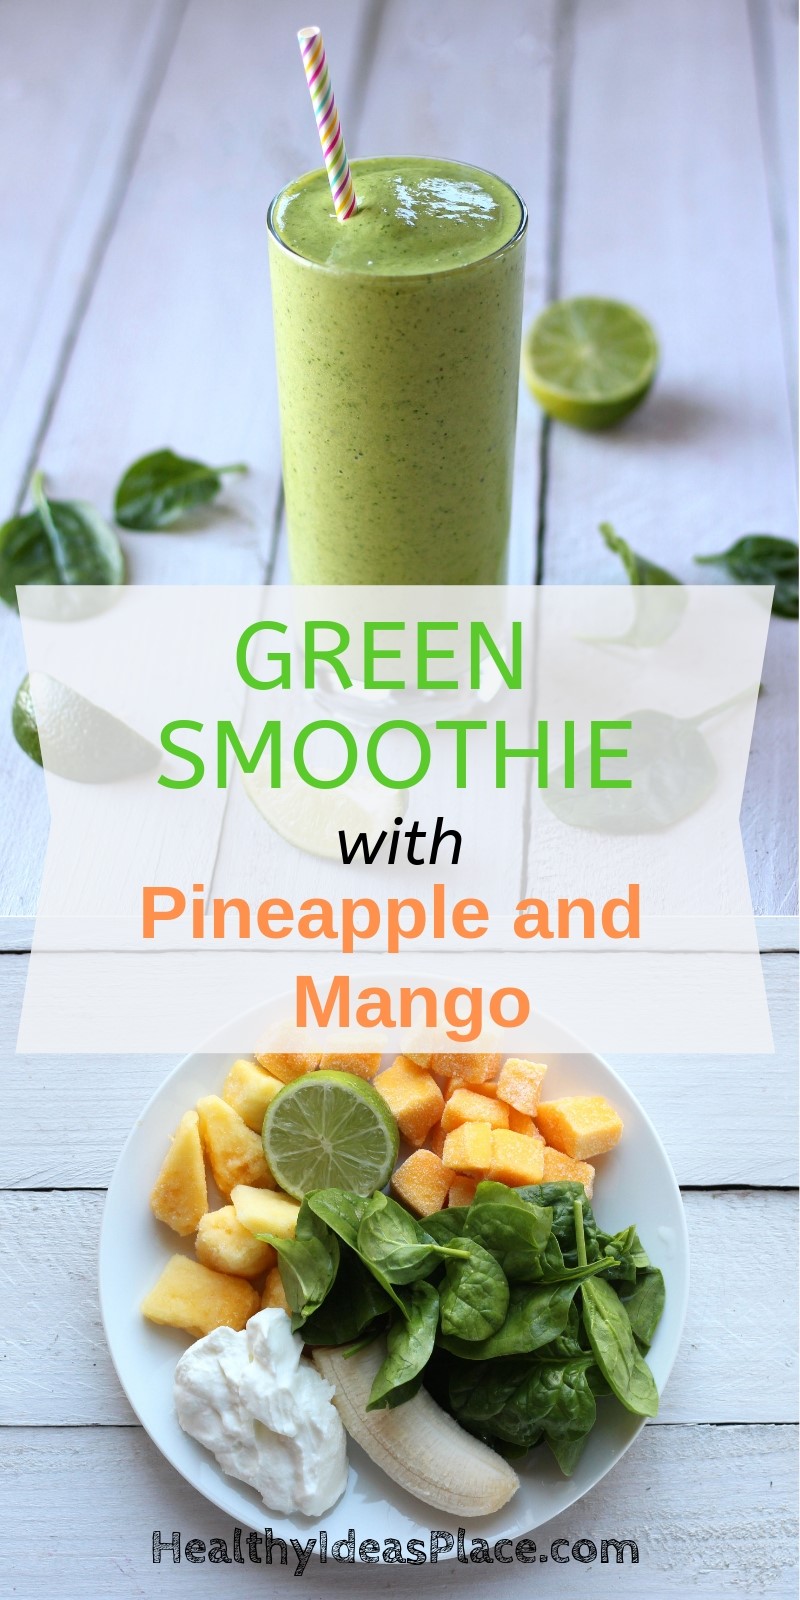 This Green Smoothie with Pineapple and Mango is quick and easy to prepare; and makes a tasty, nourishing breakfast smoothie or an energizing afternoon snack.